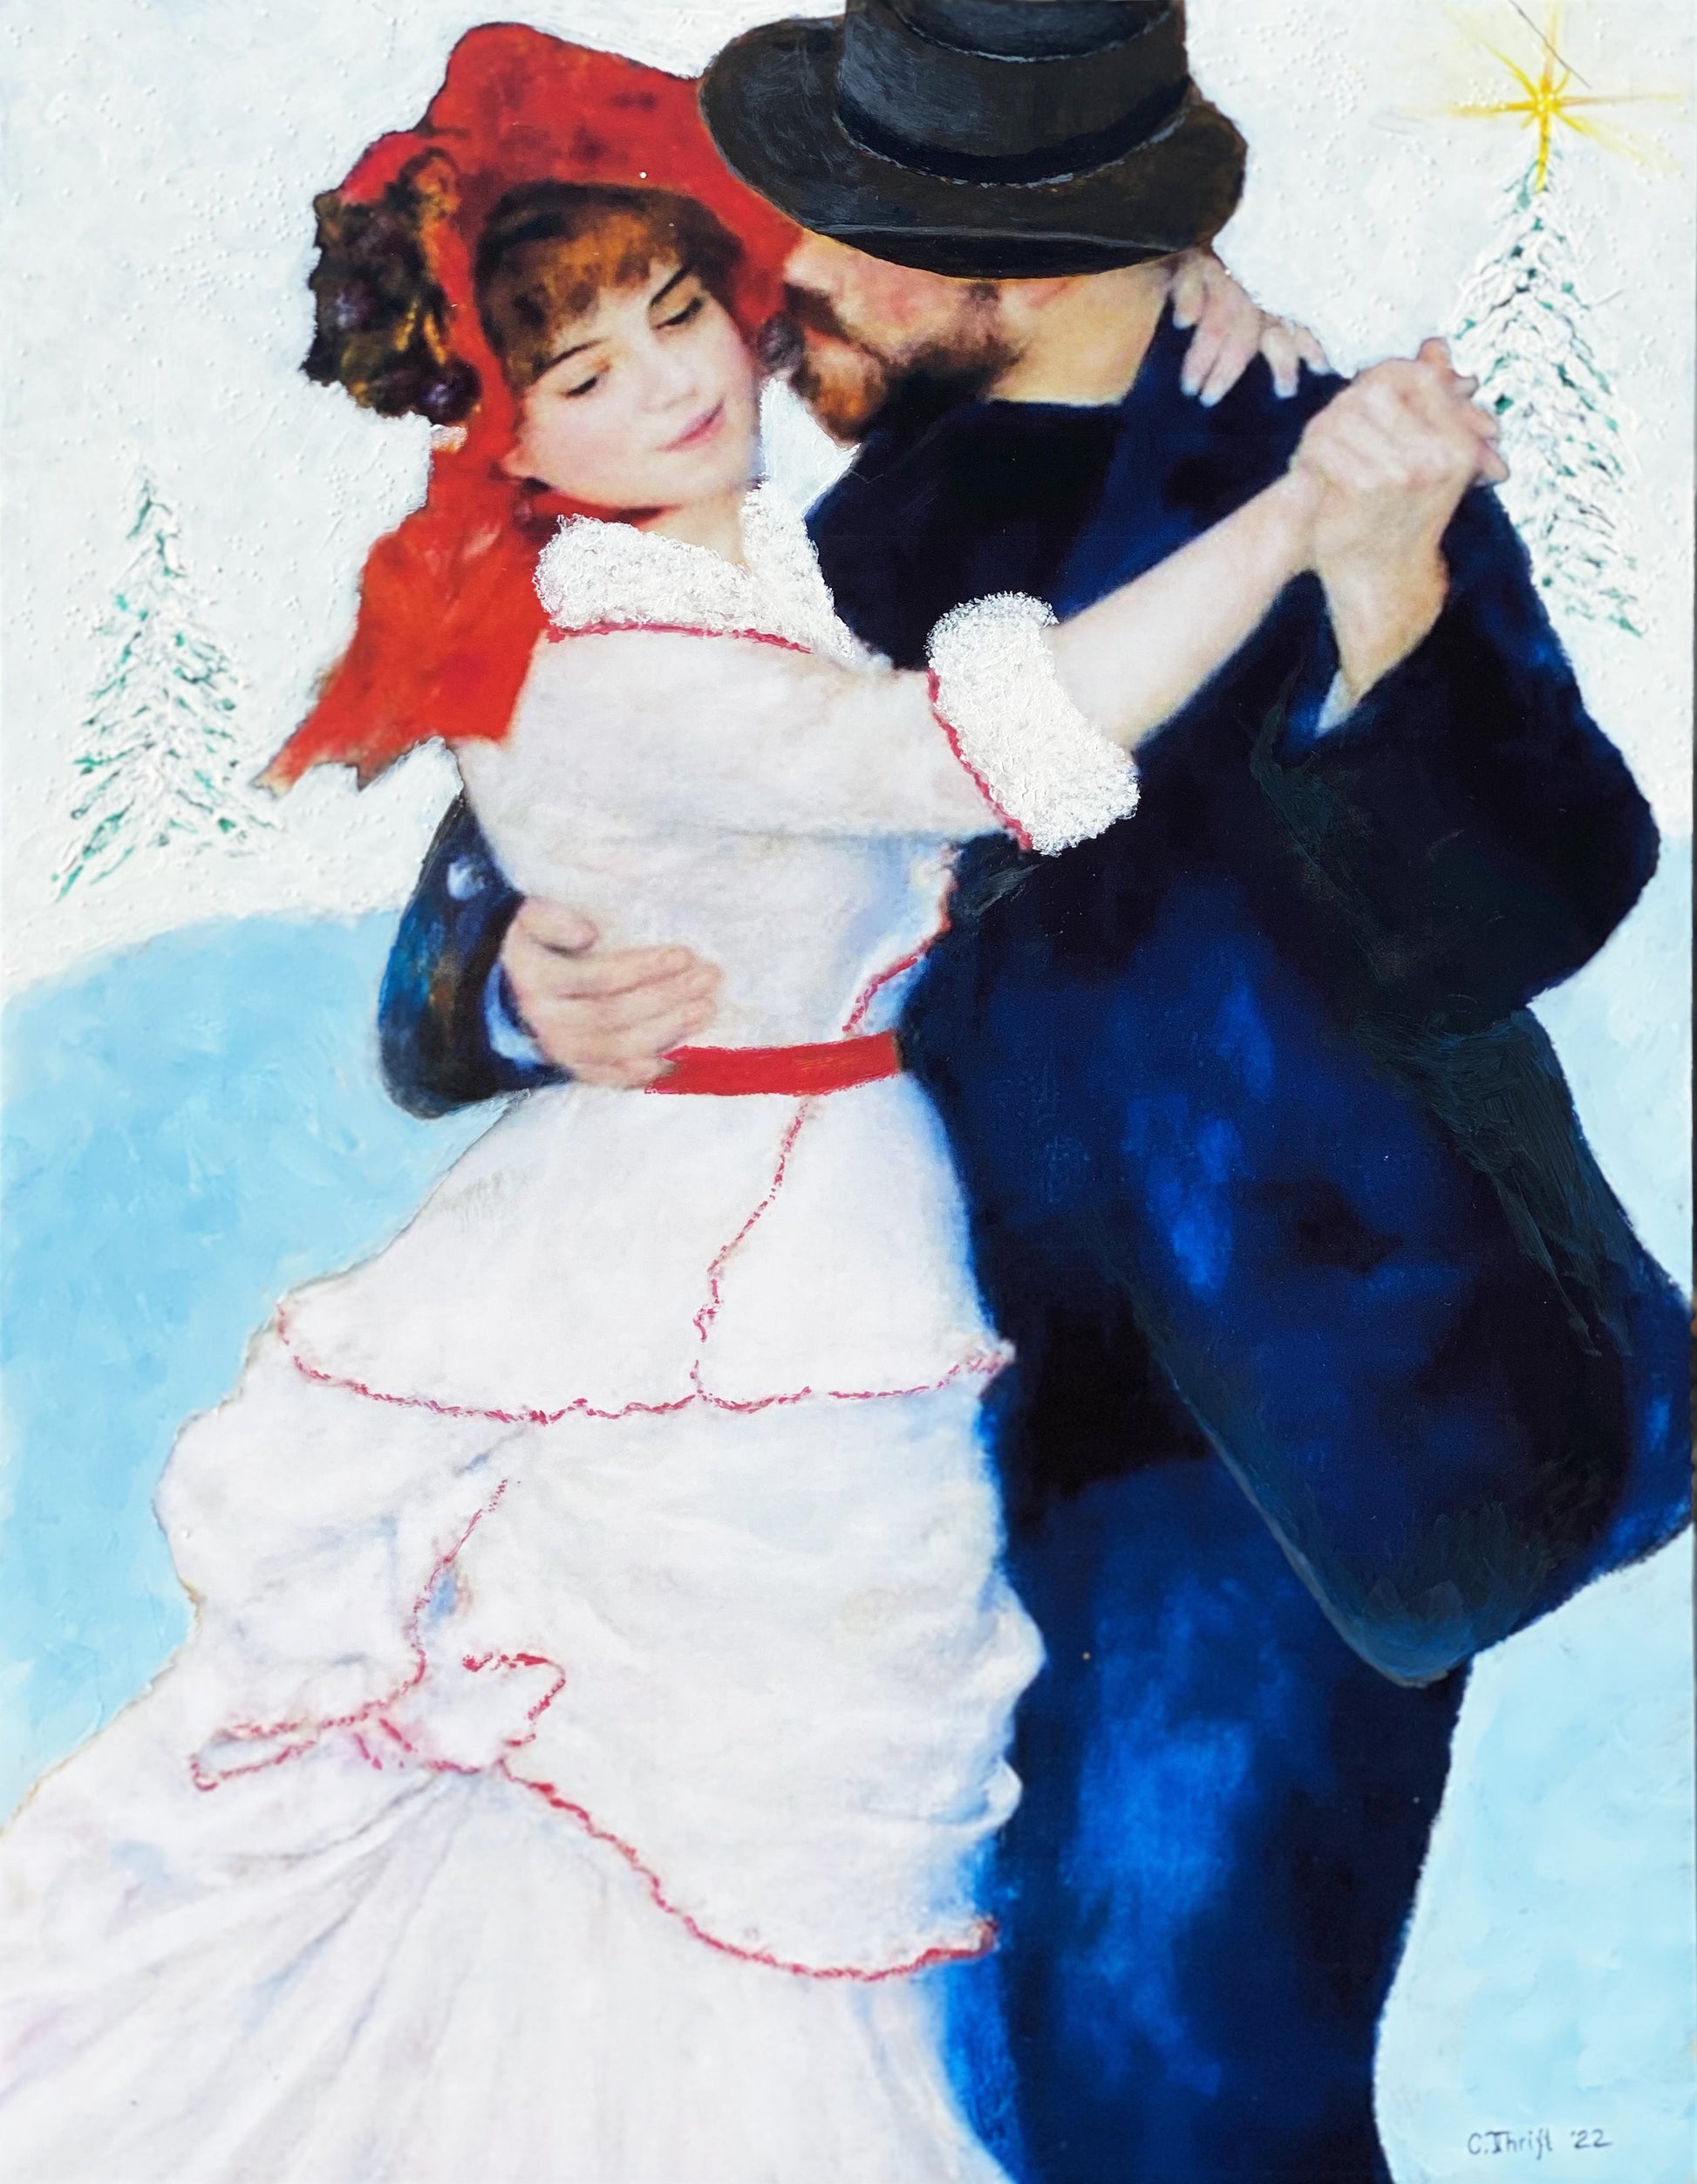 "Holiday-ified" Art Print of Pierre-Auguste Renoir's "Dance at Bougival" by Charles Thrift